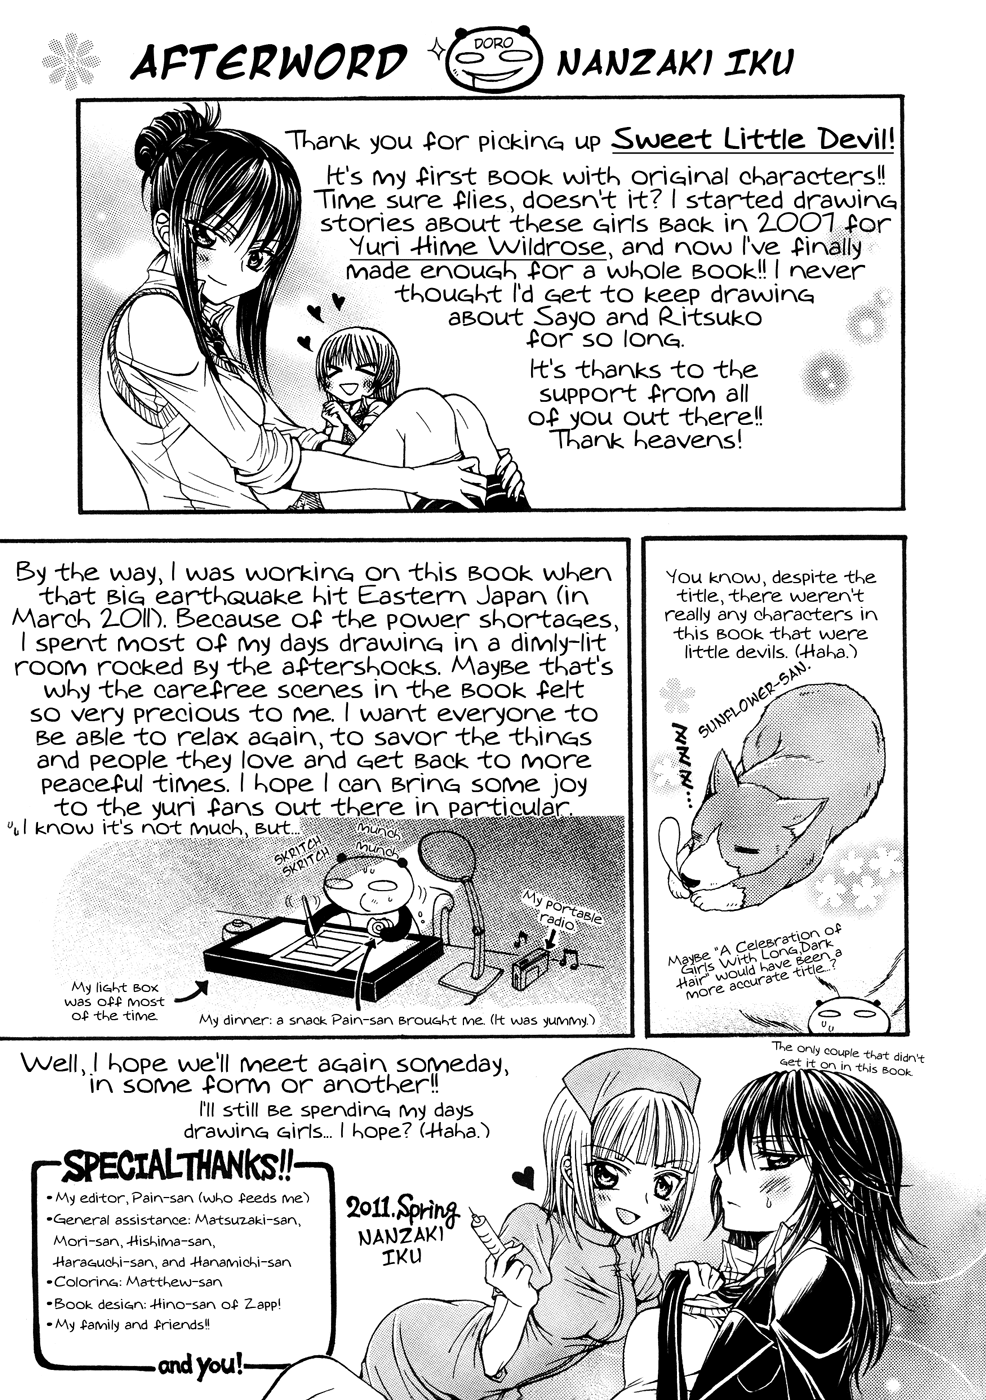 [Nanzaki Iku] One and Only (Sweet Little Devil) [English] [Lililicious] [南崎いく] One and Only (Sweet Little Devil) [英訳]